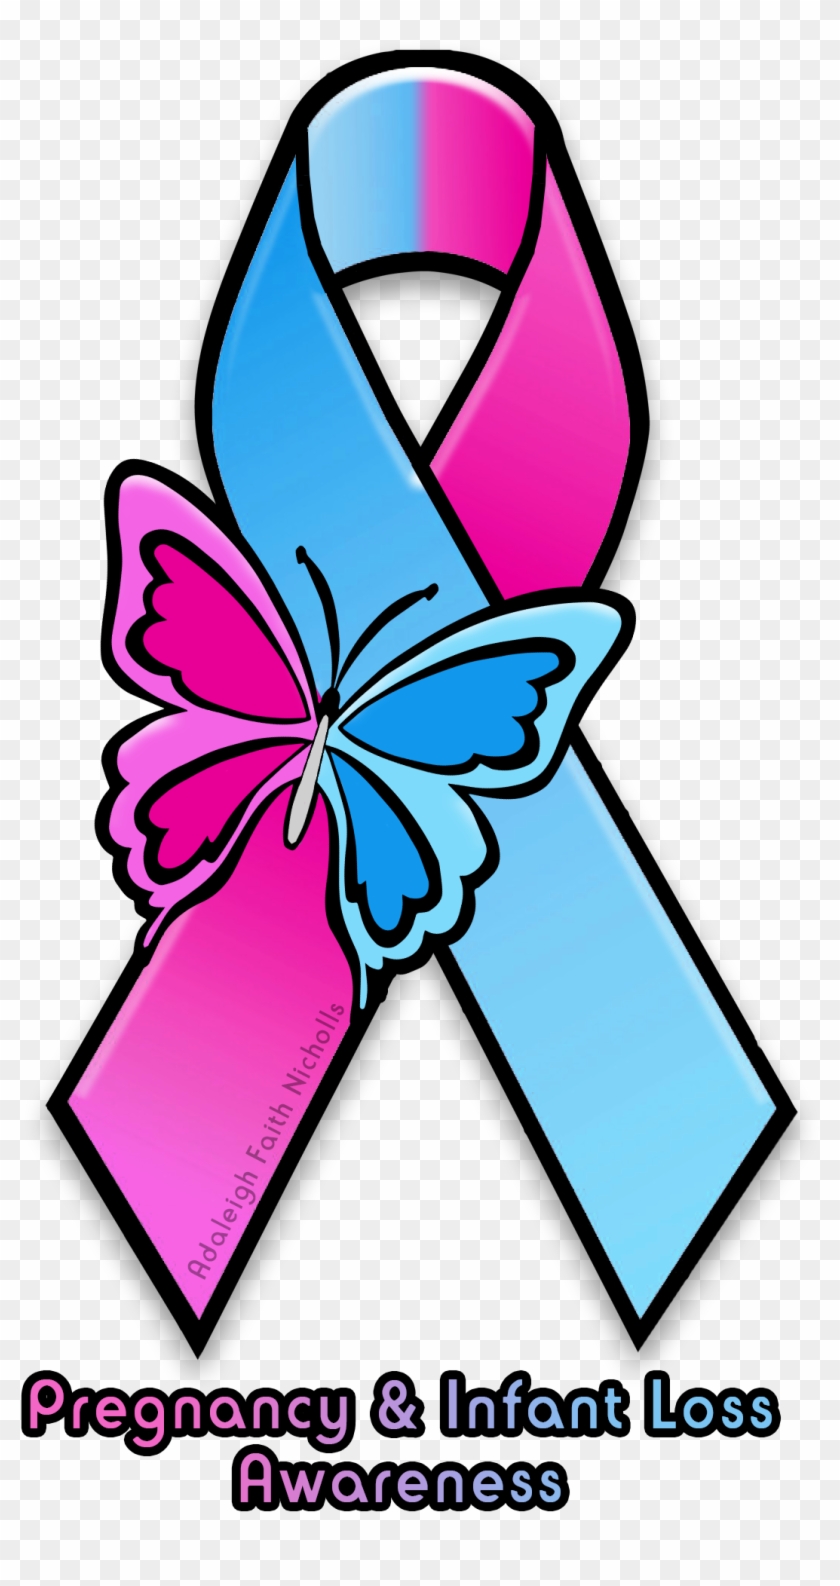 Adaleighfaith 2 0 Pregnancy And Infant Loss Awareness - Mental Health Green Ribbon Png #188100